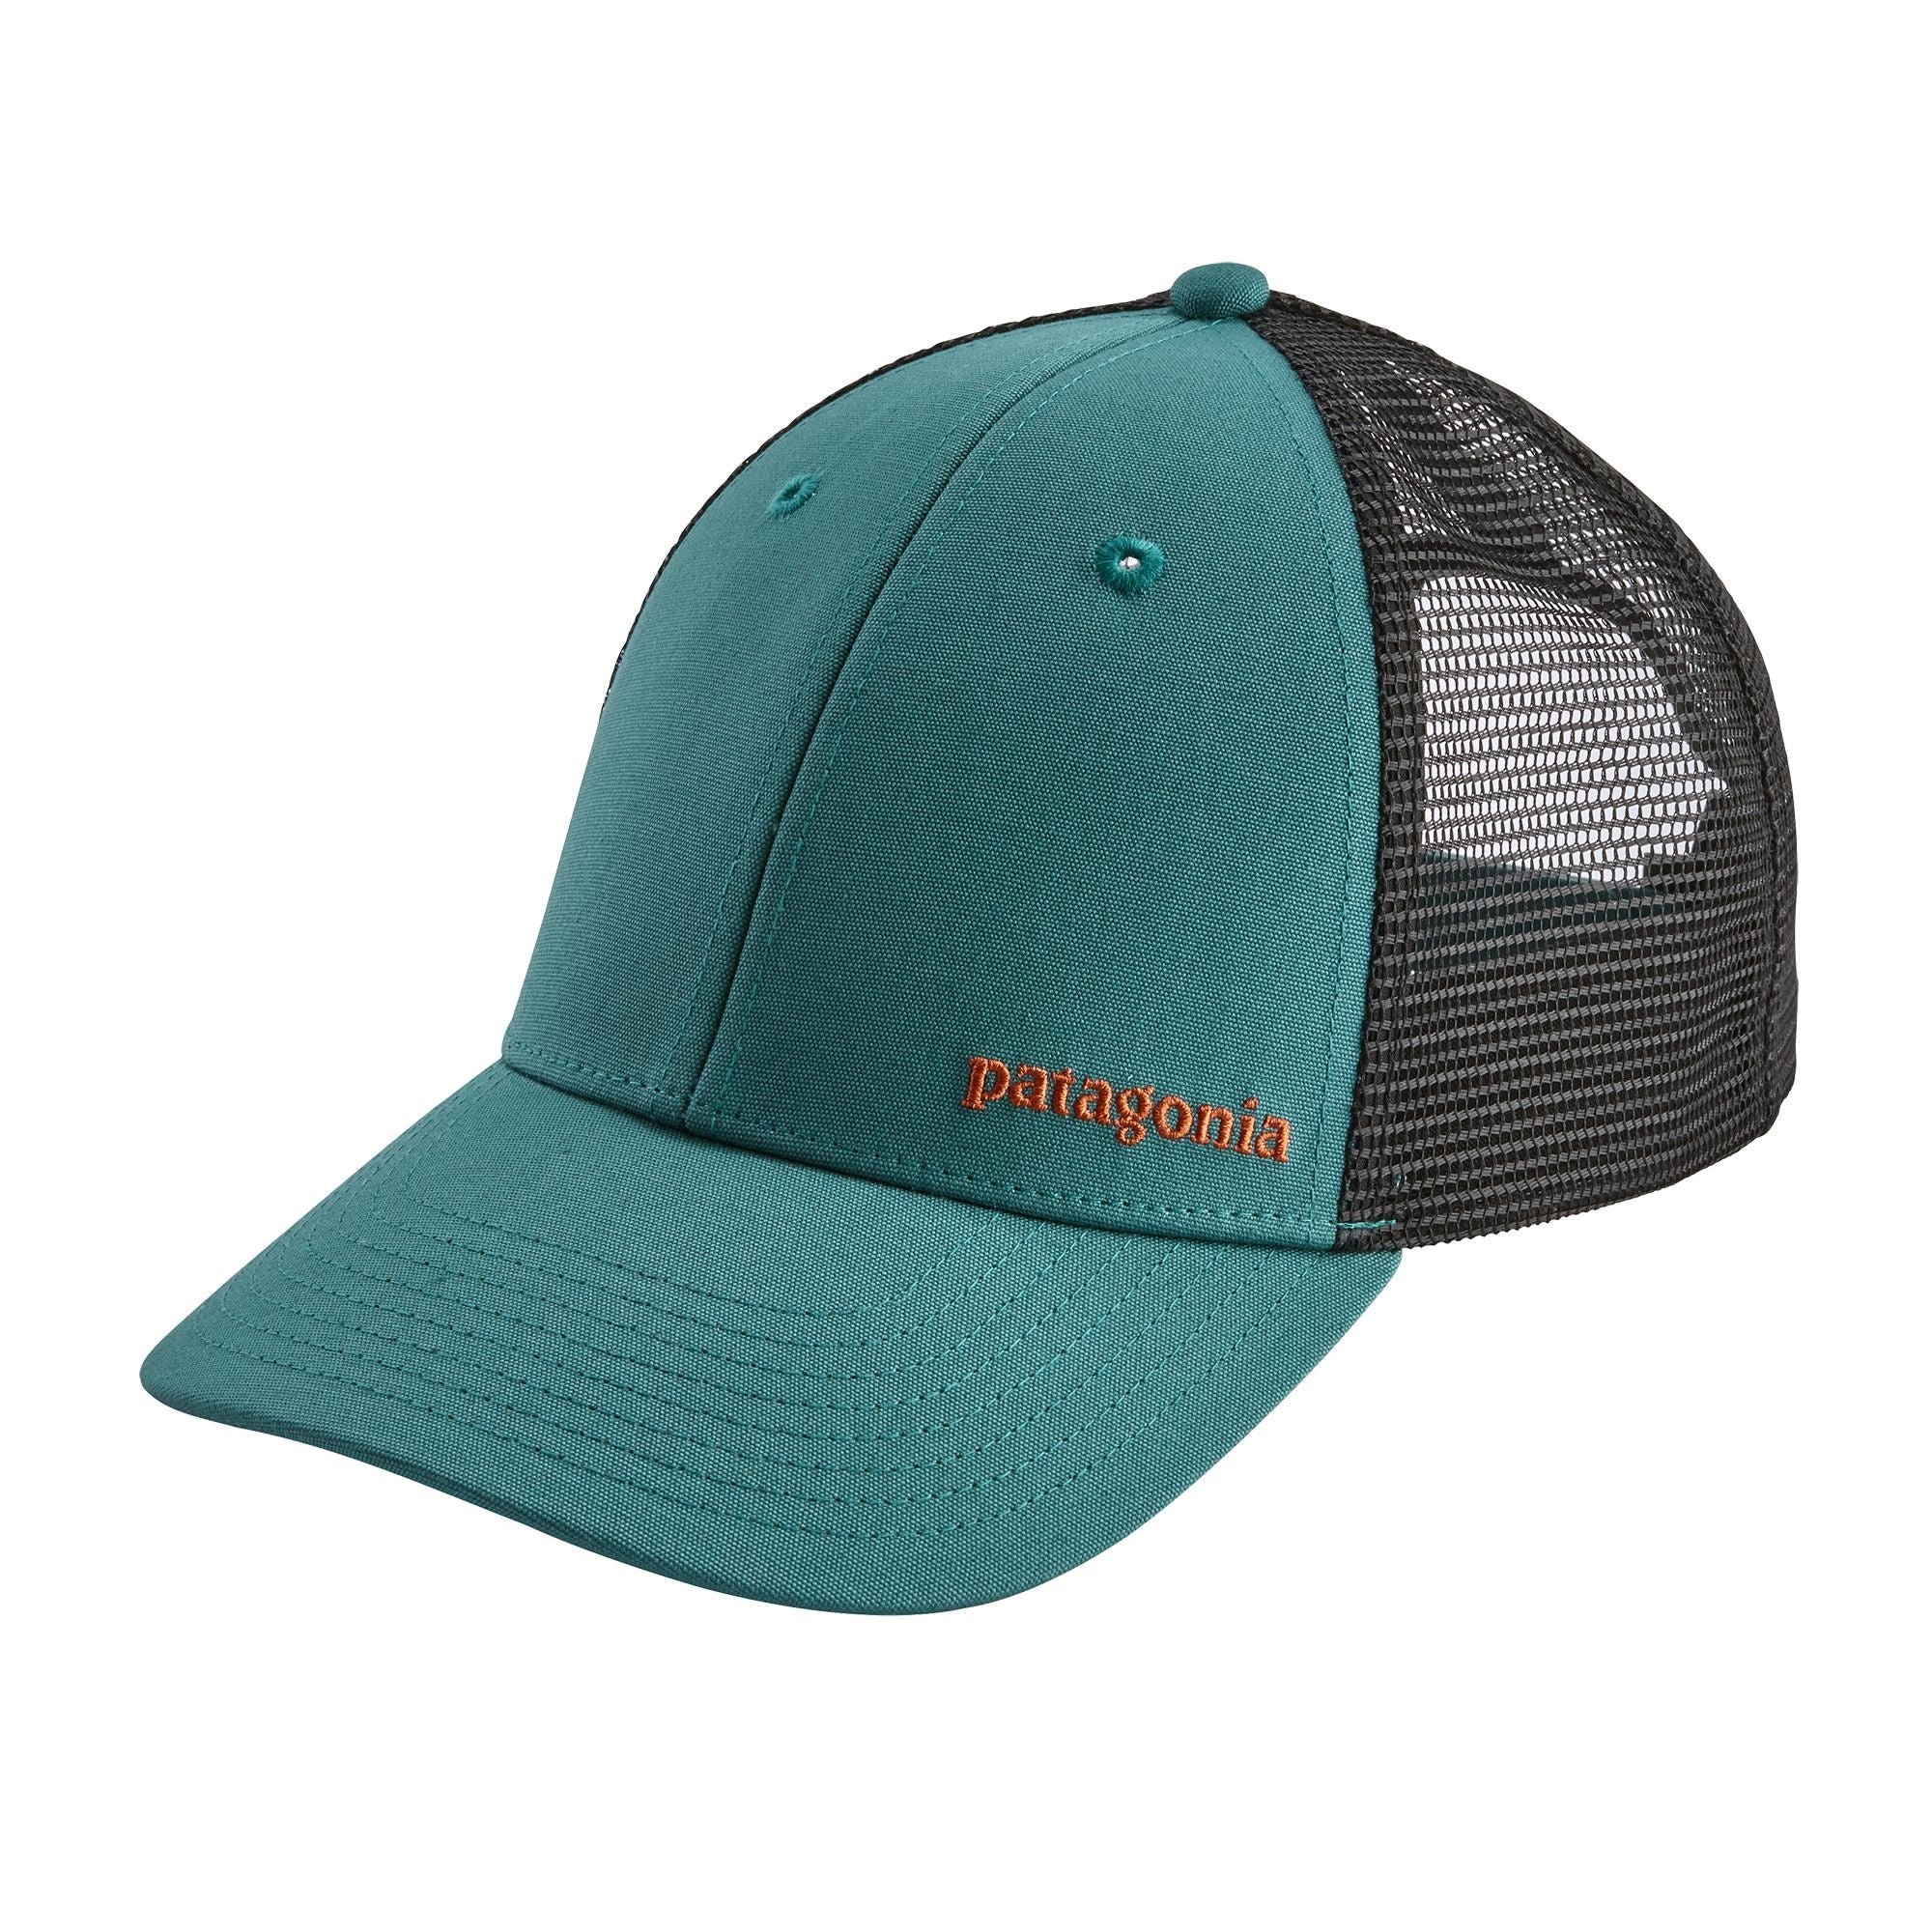 Patagonia Small Text Logo LoPro Trucker Hat/Tasmanian Teal - Andy